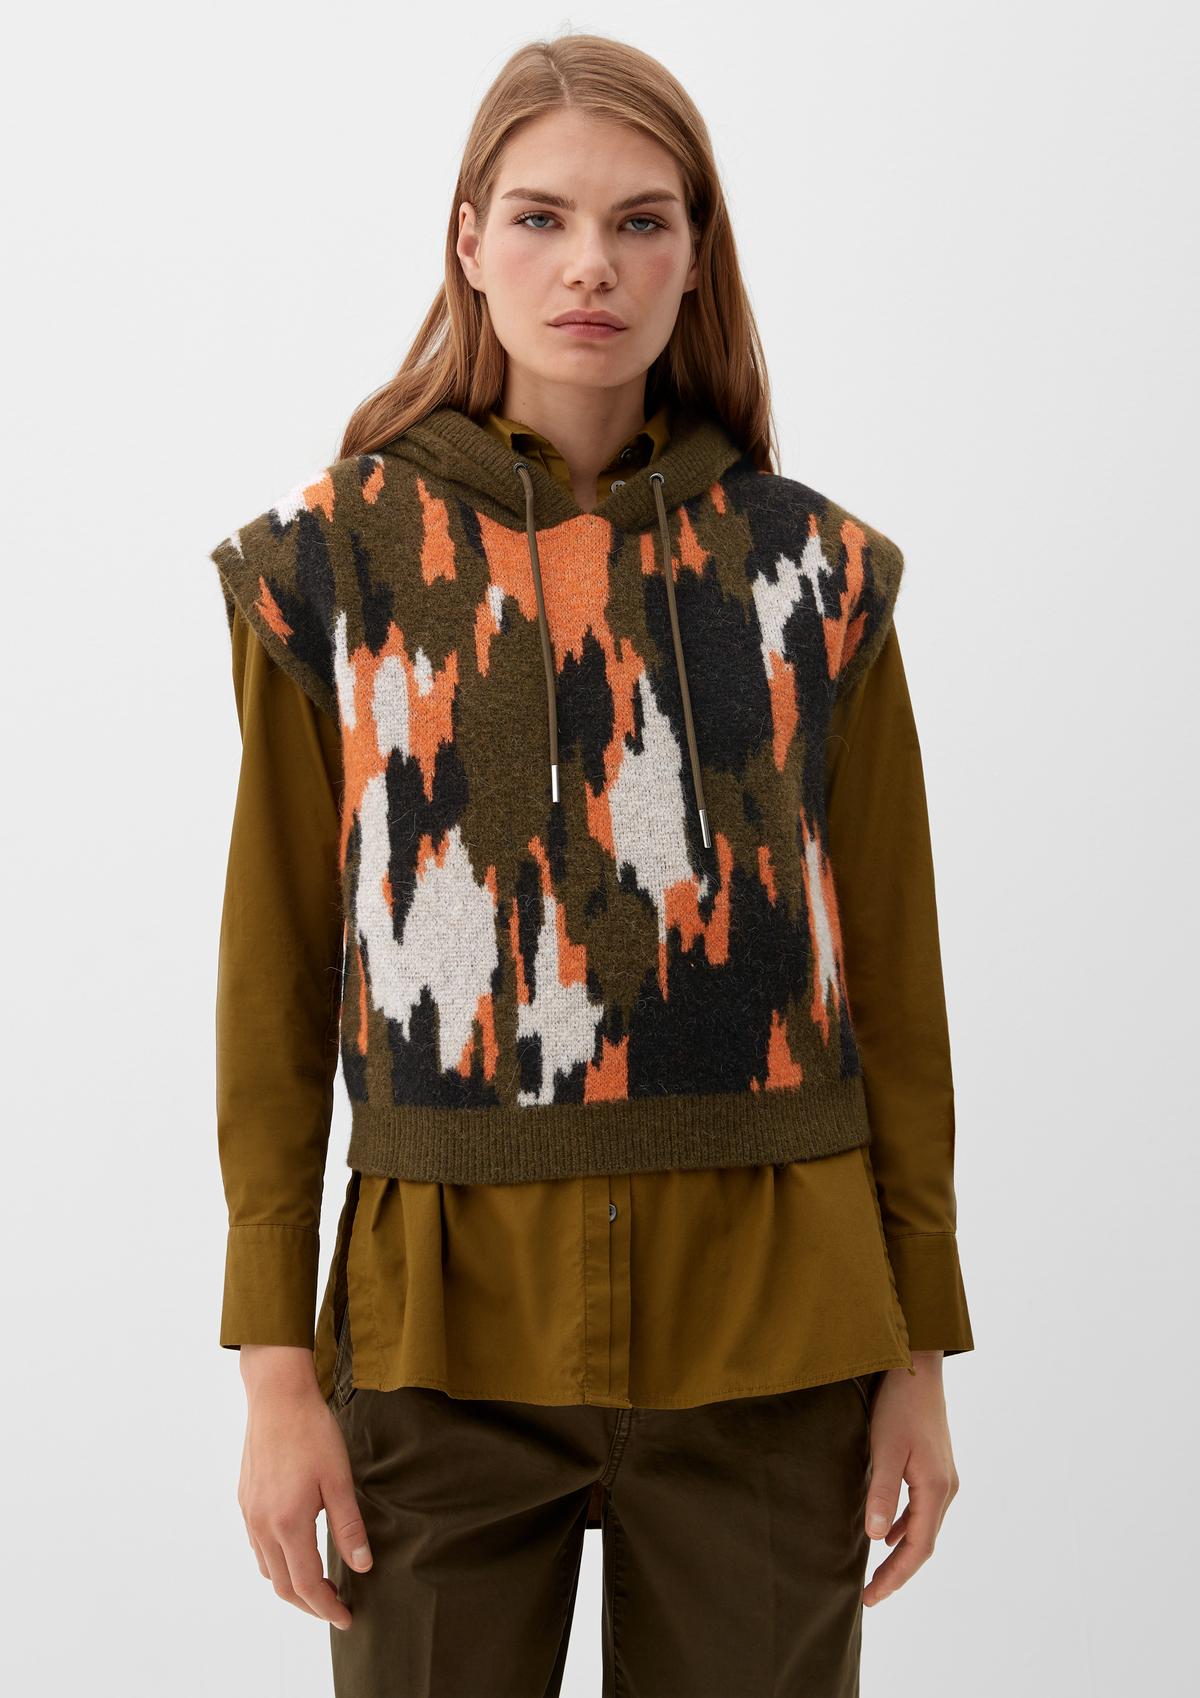 Sleeveless jumper with a jacquard pattern